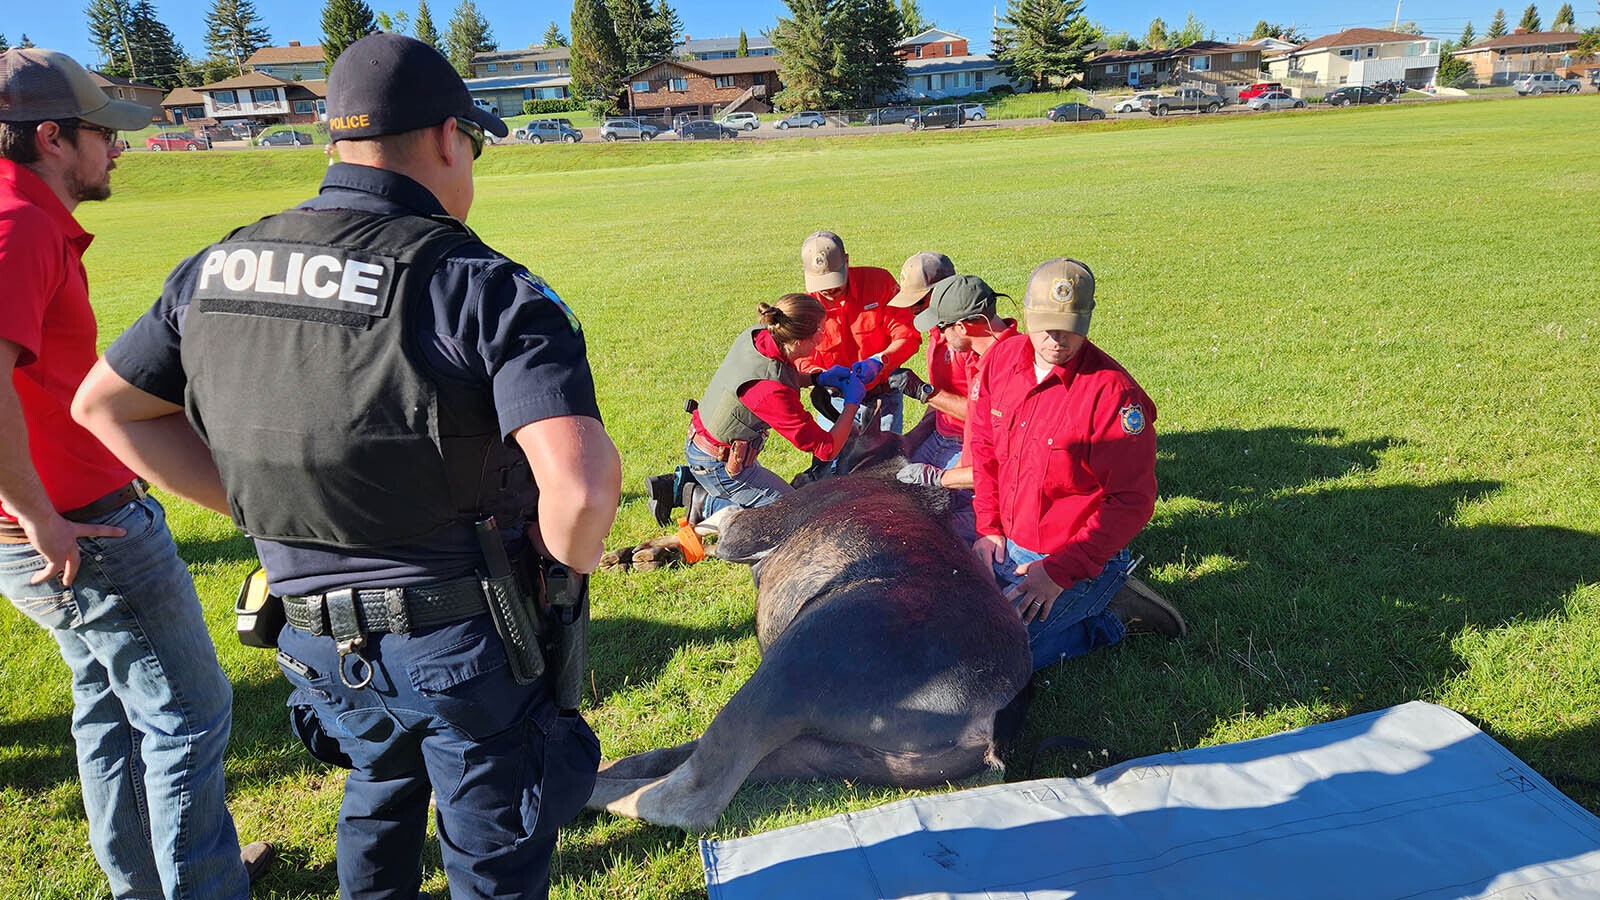 Game wardens and police officers tranquilized and captured a young bull moose on the grounds of Slade Elementary School in Laramie early Monday. The moose was taken to the Snowy Range Mountains and set free.